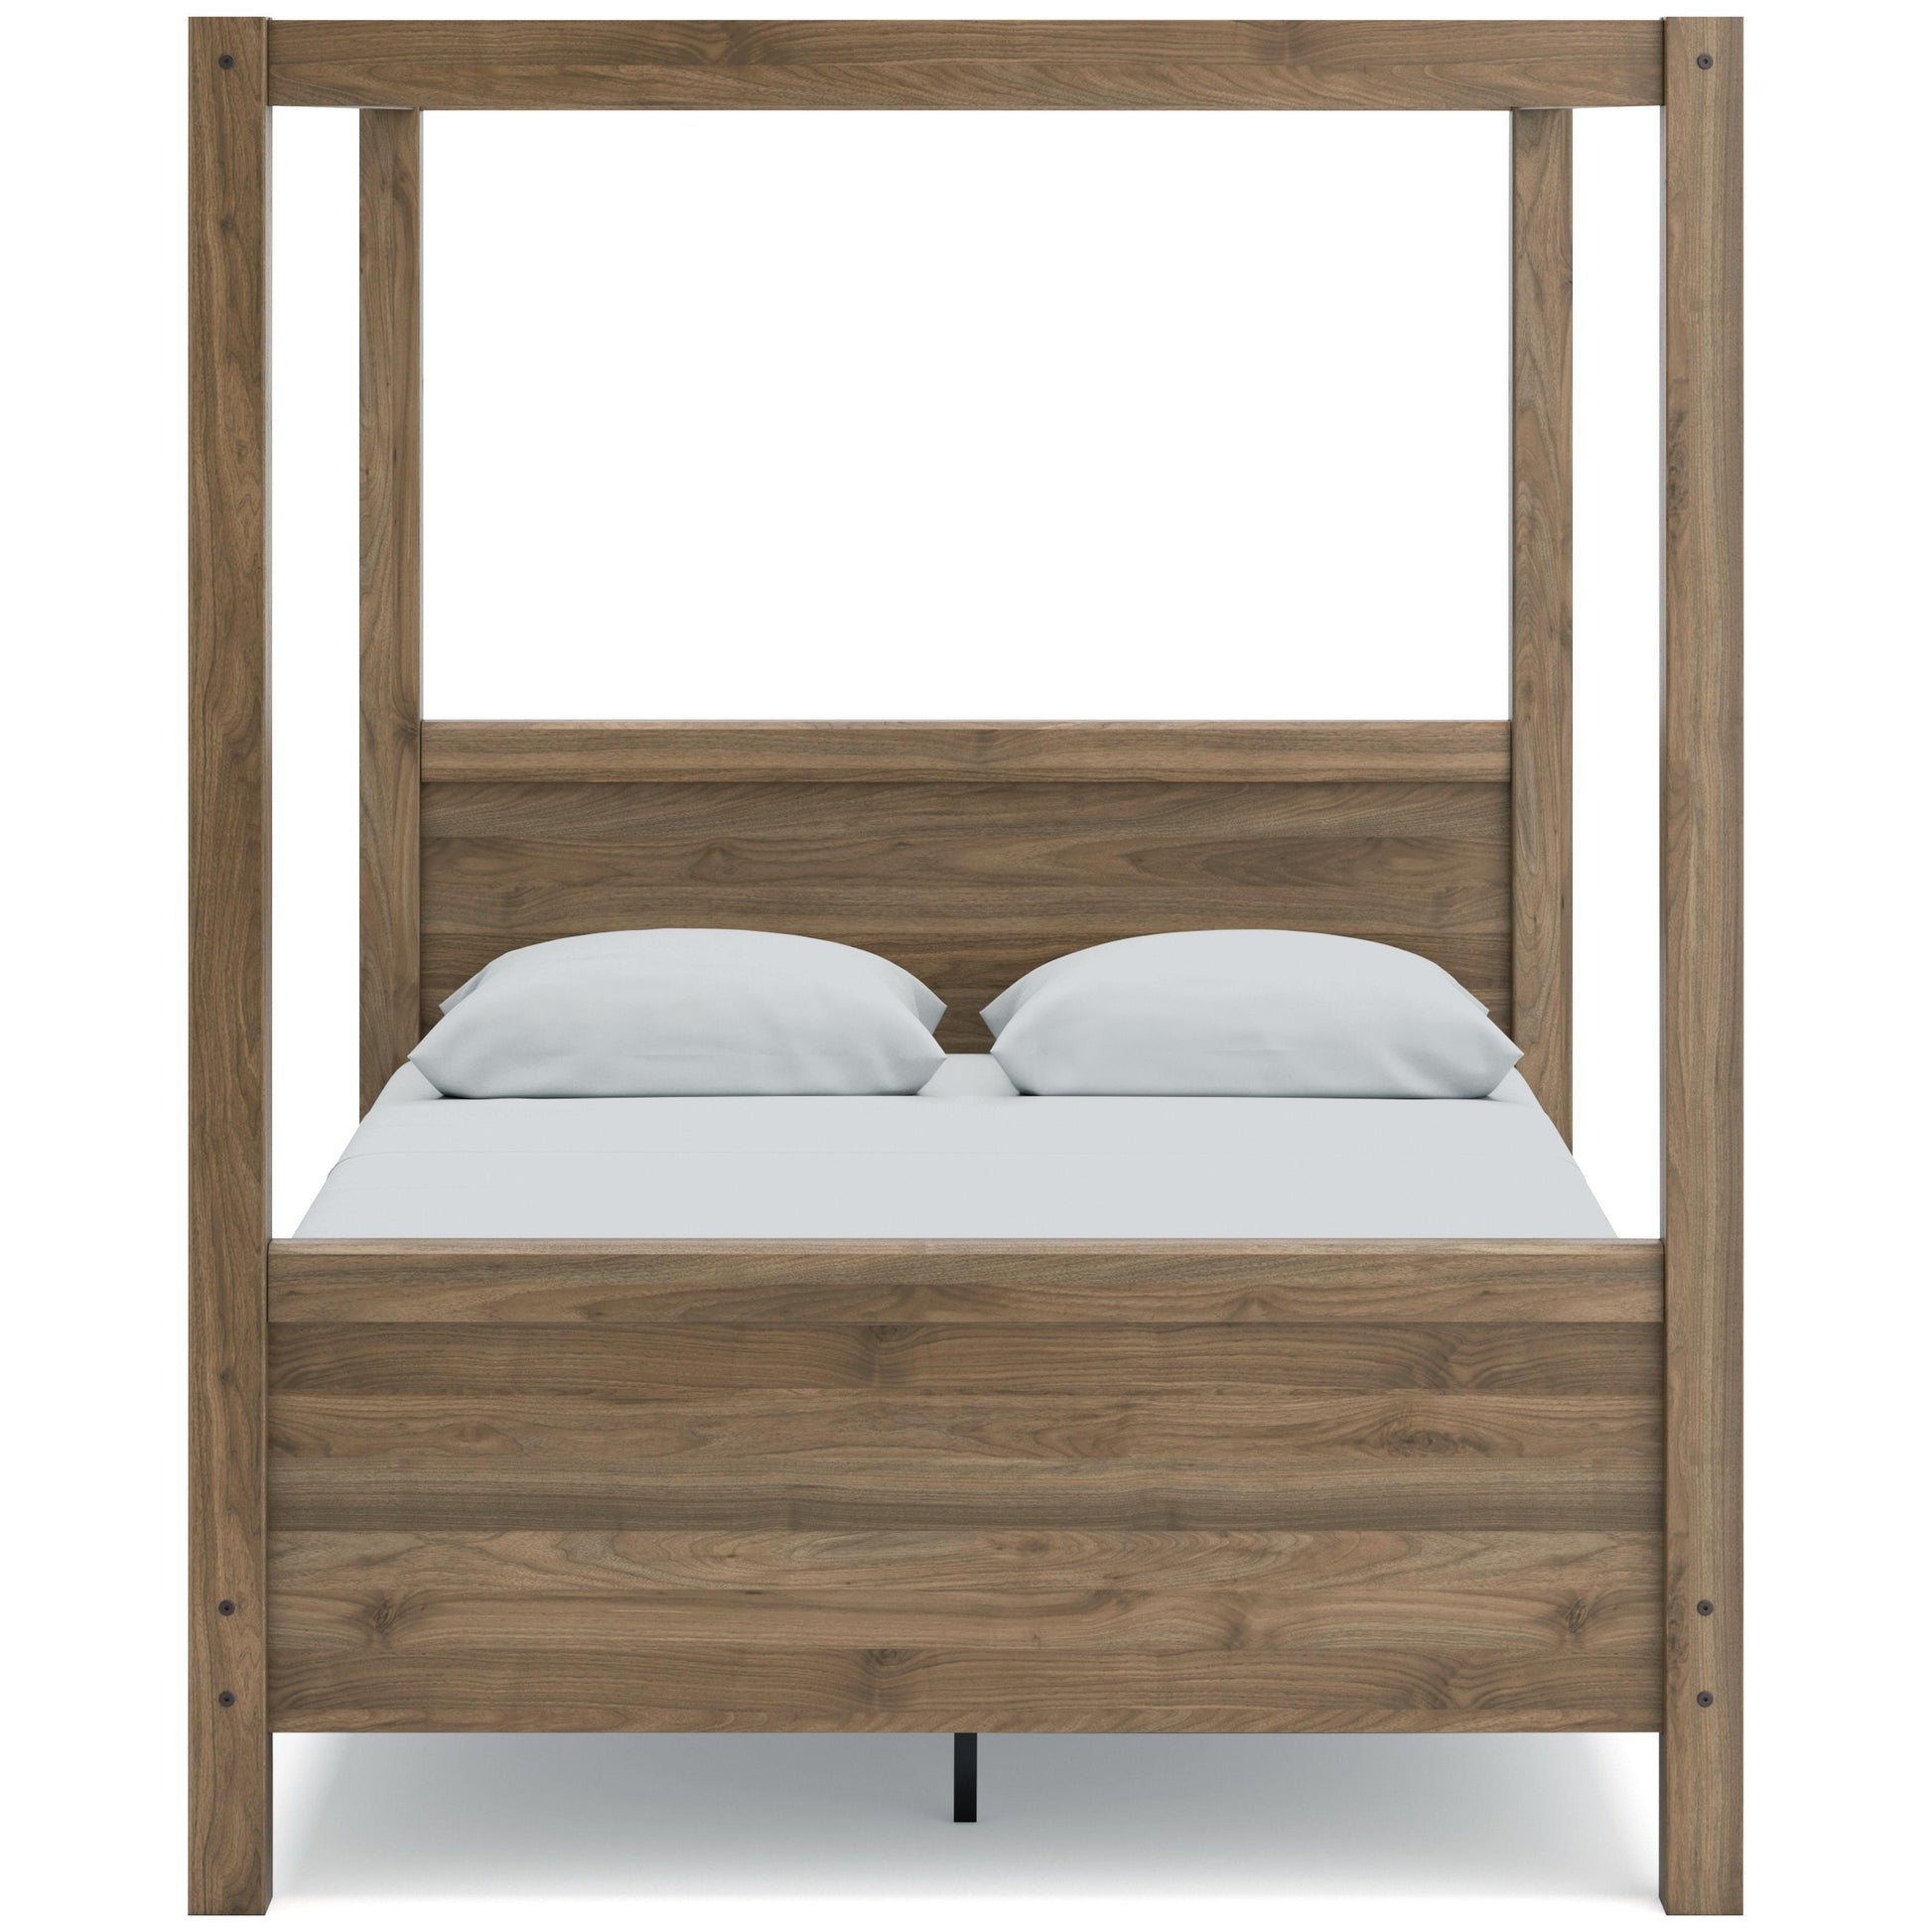 Signature Design by Ashley Aprilyn Queen Canopy Bed EB1187-171/EB1187-198/EB1187-161 IMAGE 2